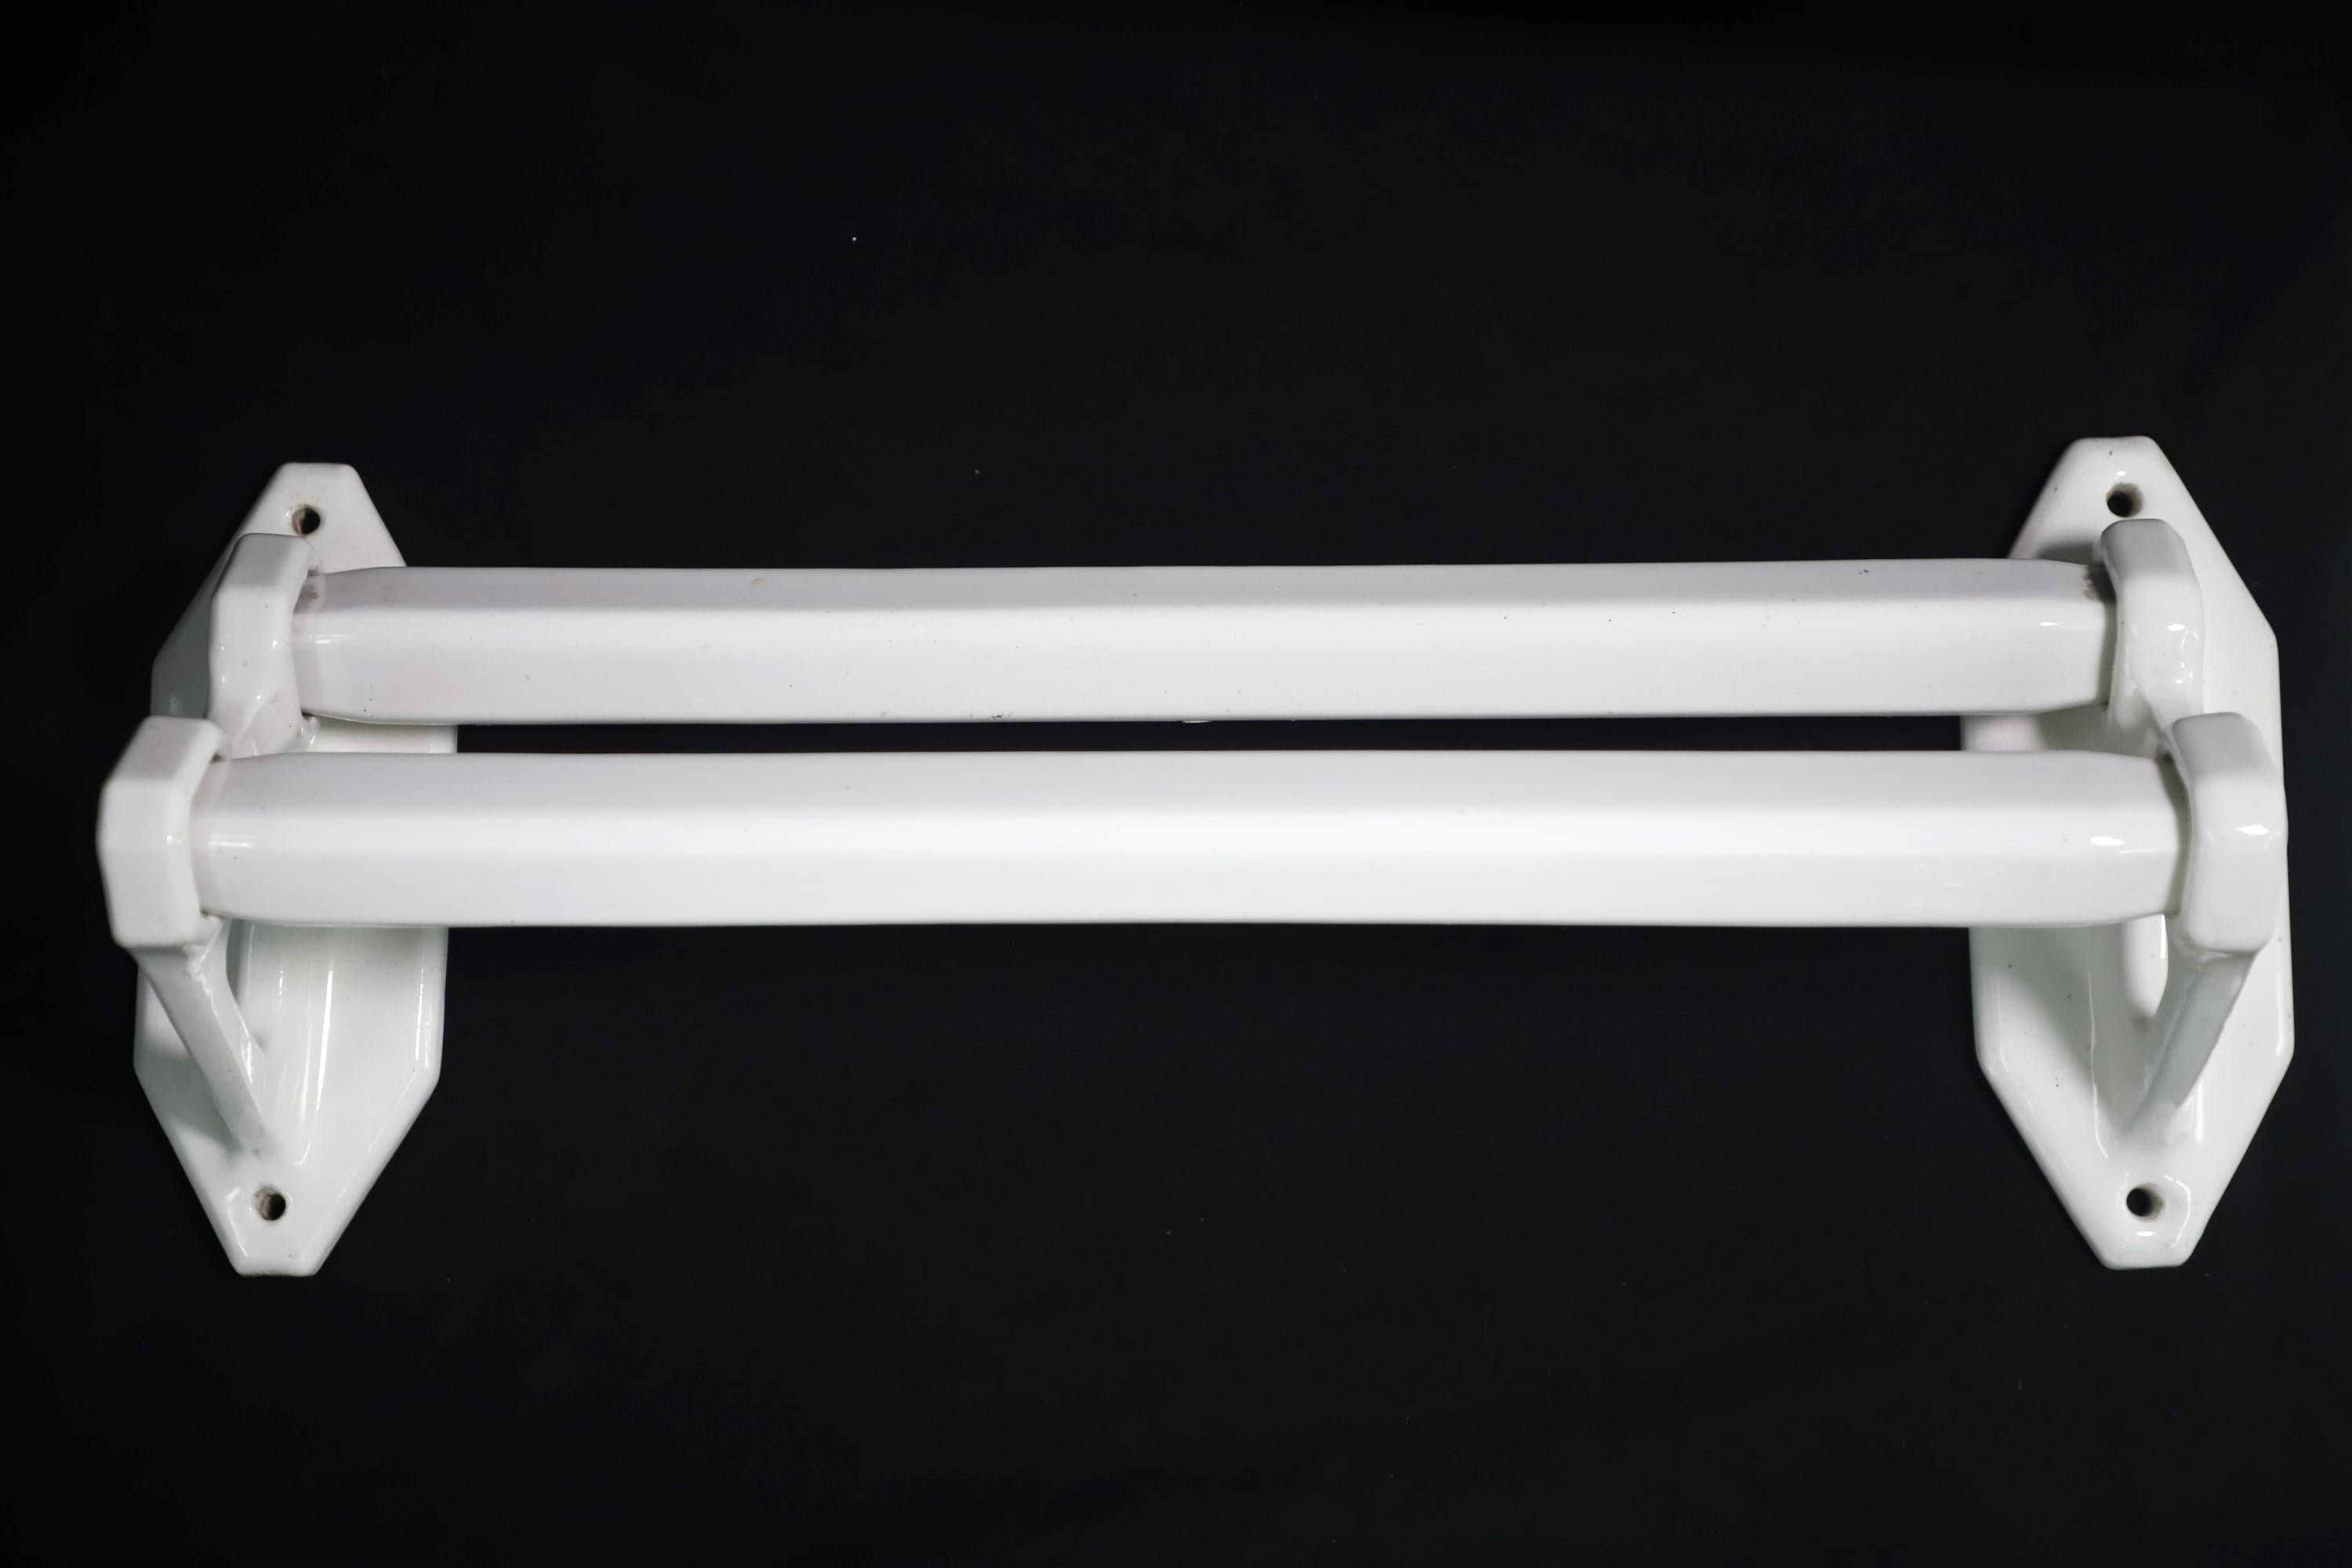 From Europe, this wall mounted white towel bar holds two towels. Made of ceramic. Useful in either a bathroom or kitchen. Minor chips, please see images. Please note, this item is located in our Scranton, PA location.